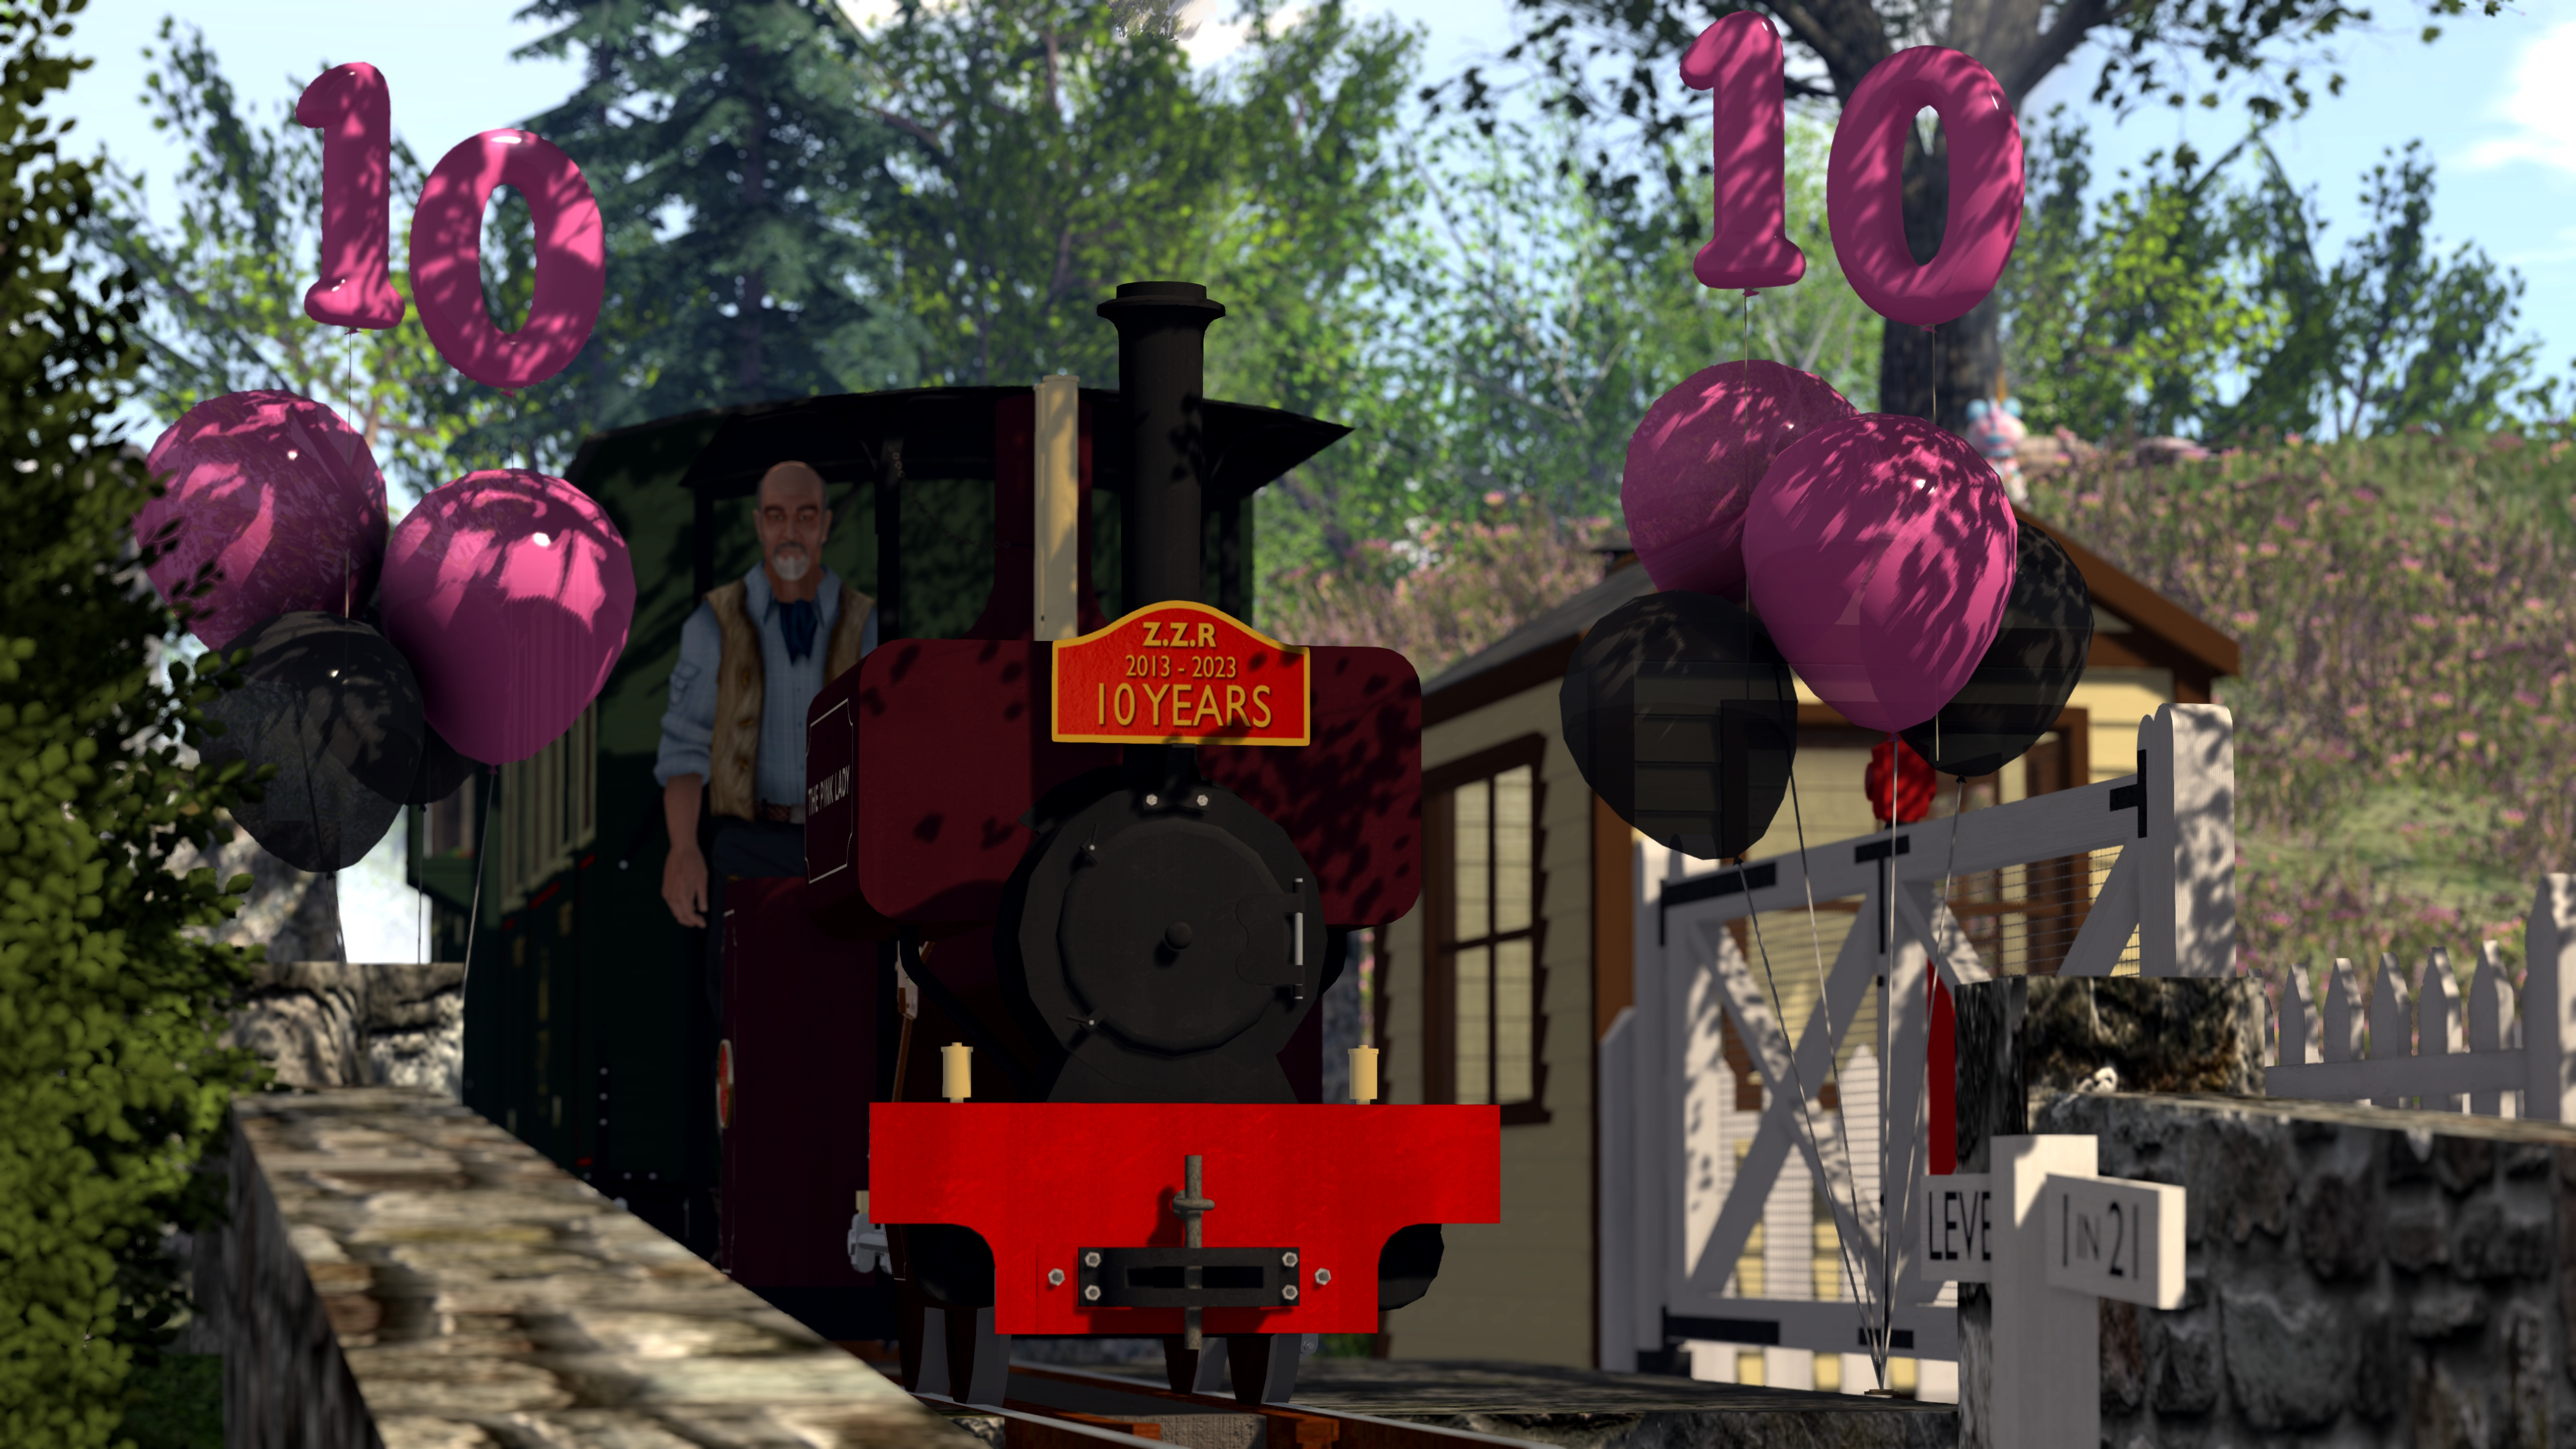 The Zany Zen Railways Pink Lady idling between two bunches of balloons for her 10th birthday